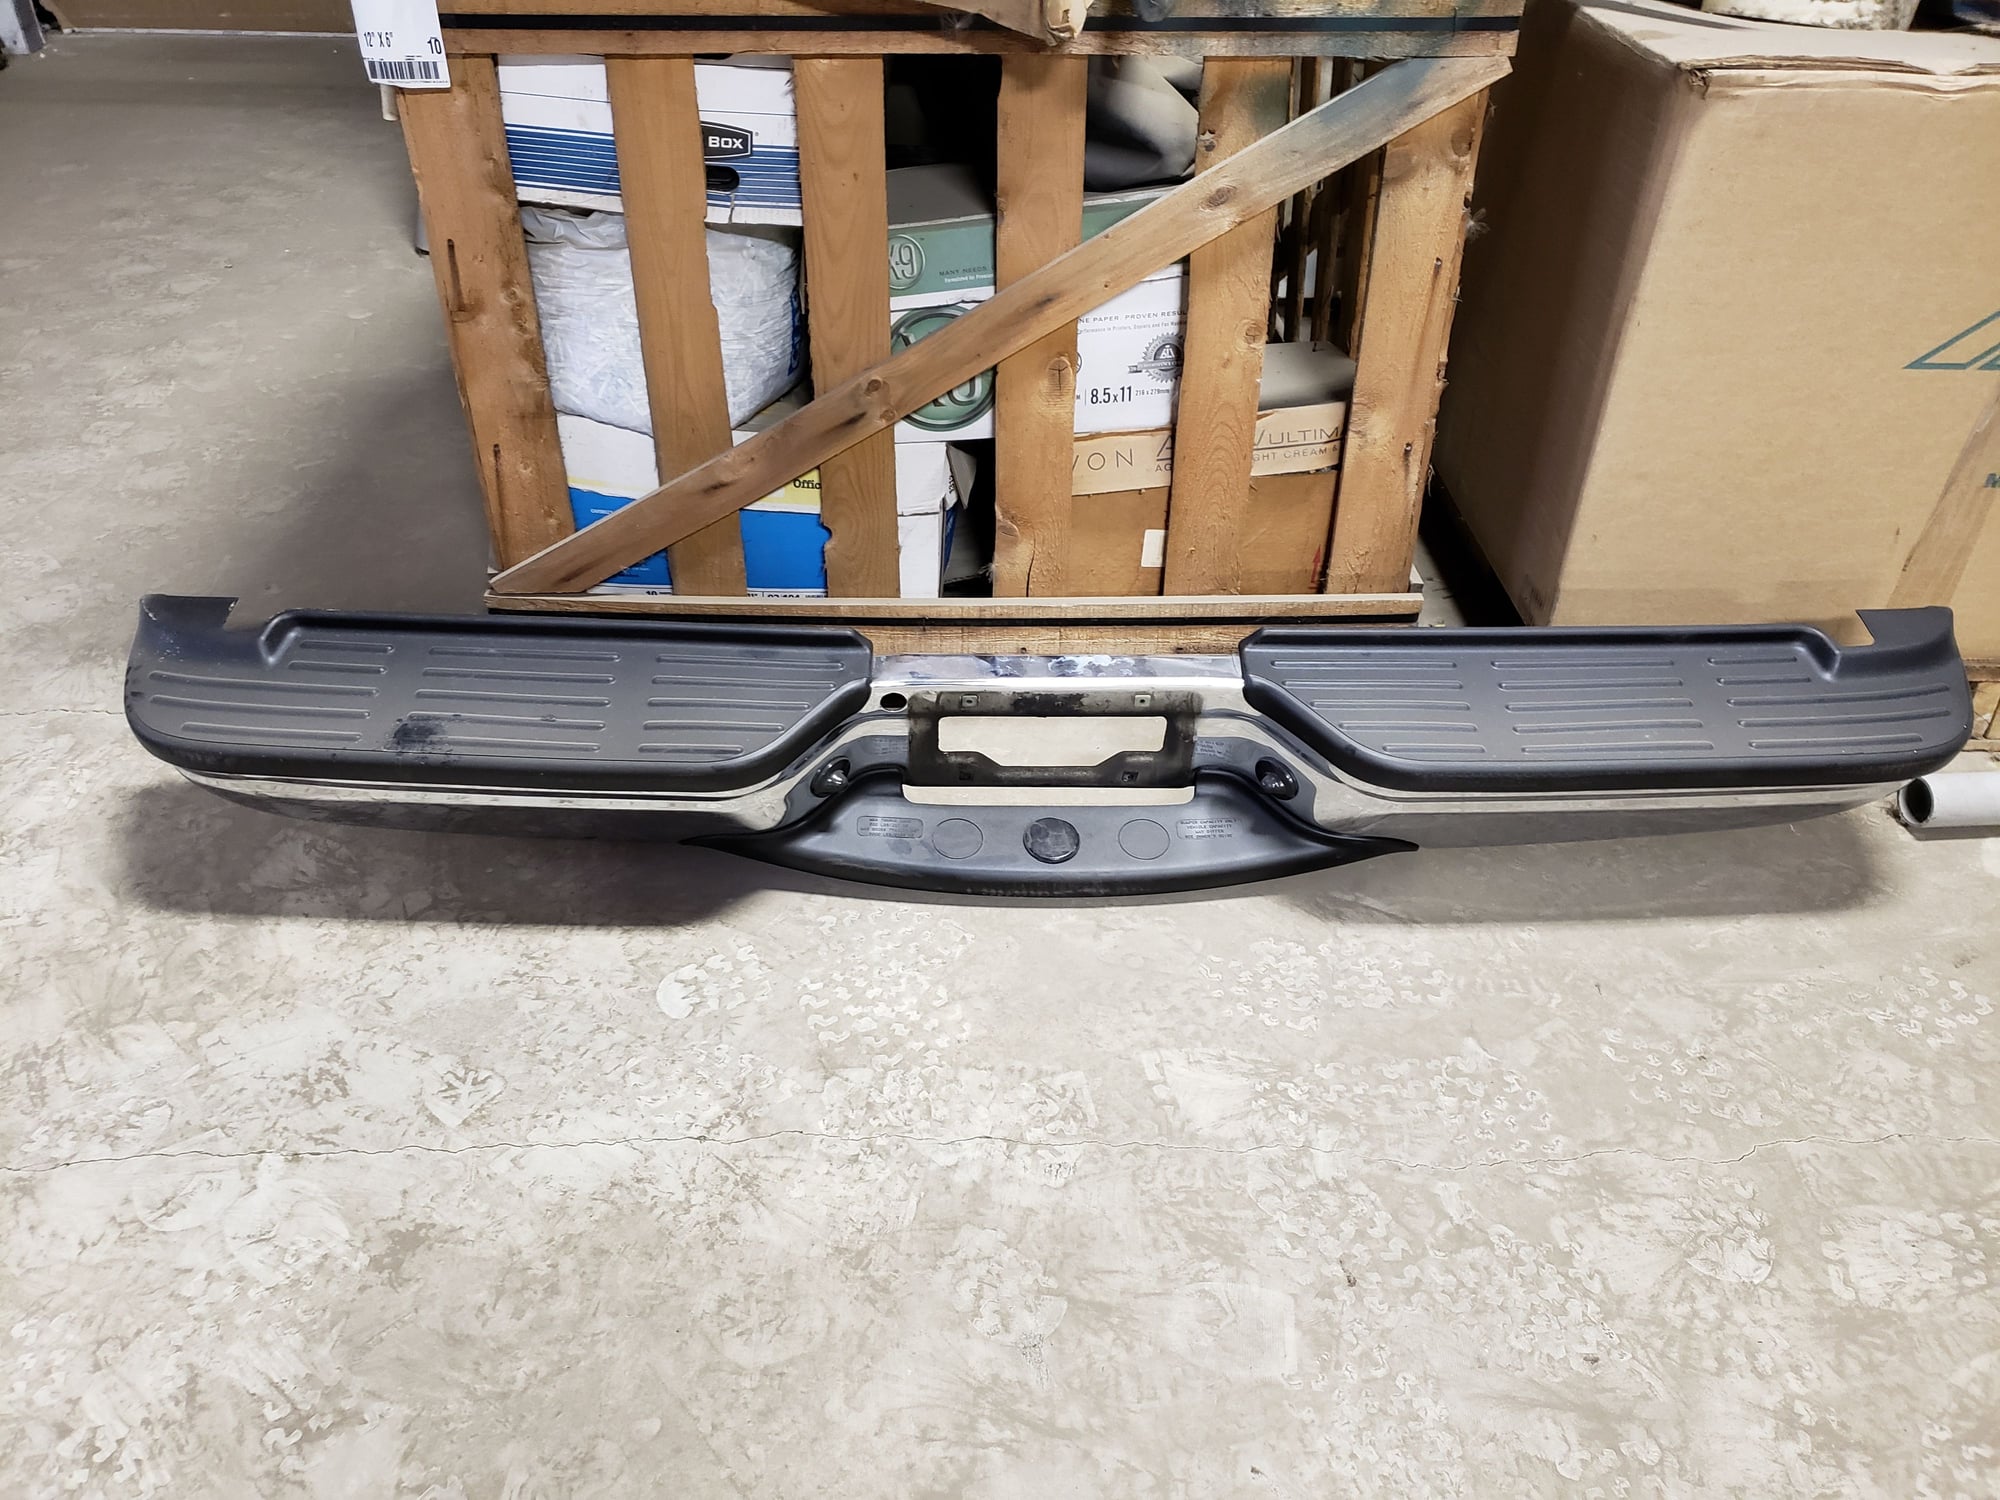 Miscellaneous - 7.3/6.0 Powerstroke Parts and 99-04 Super Duty Parts as well as other truck parts - Used - 1999 to 2004 Ford F-250 Super Duty - 1999 to 2004 Ford F-350 Super Duty - Chardon, OH 44024, United States